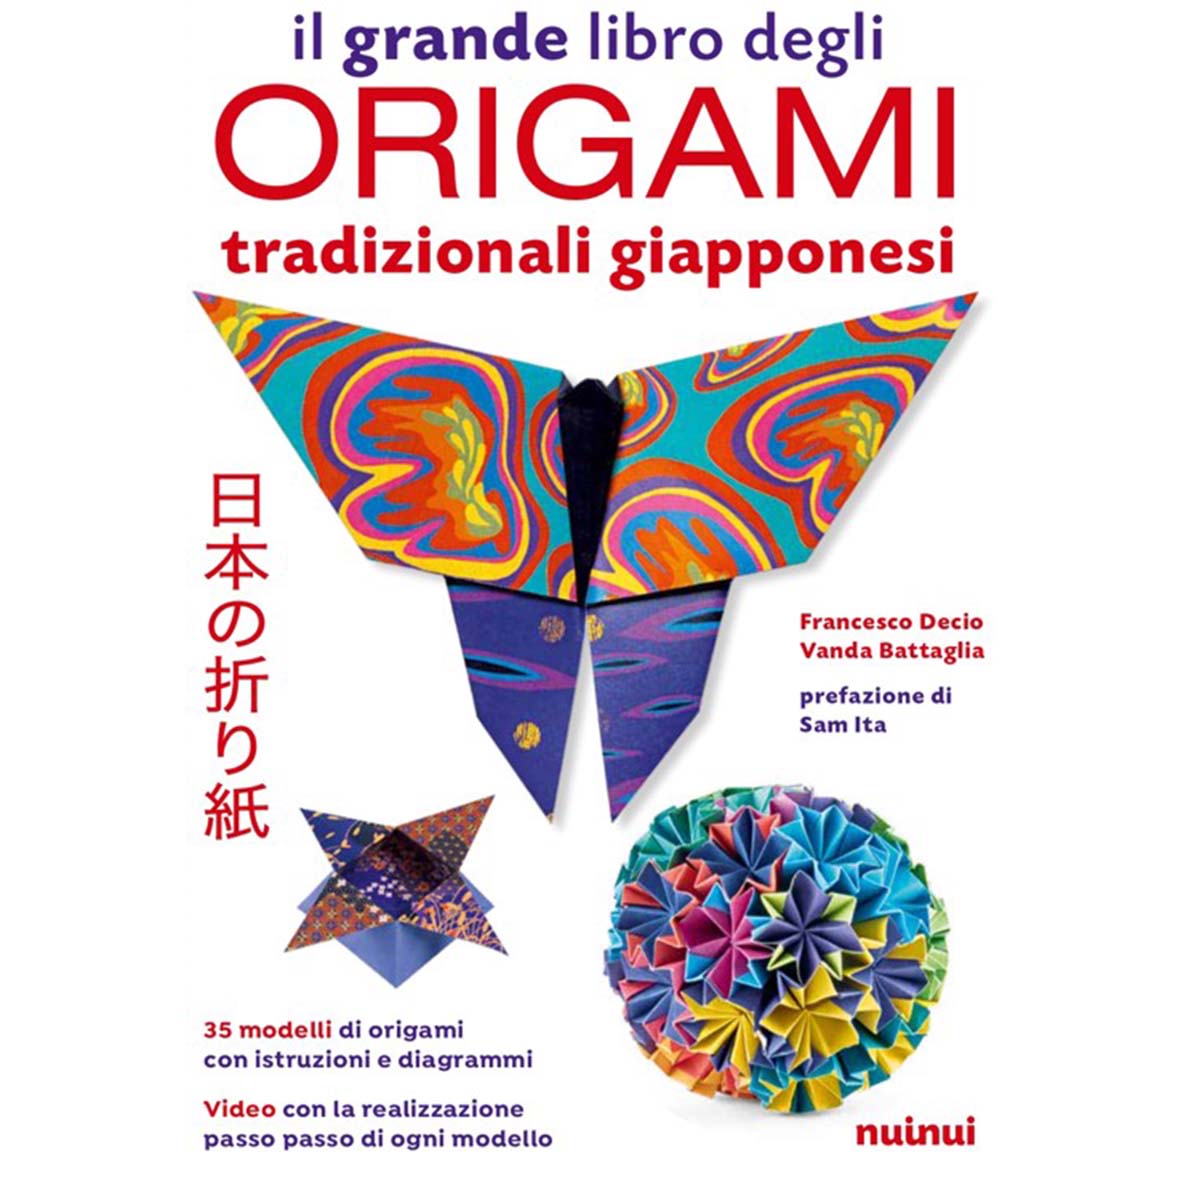 The great book of traditional Japanese origami - new edition